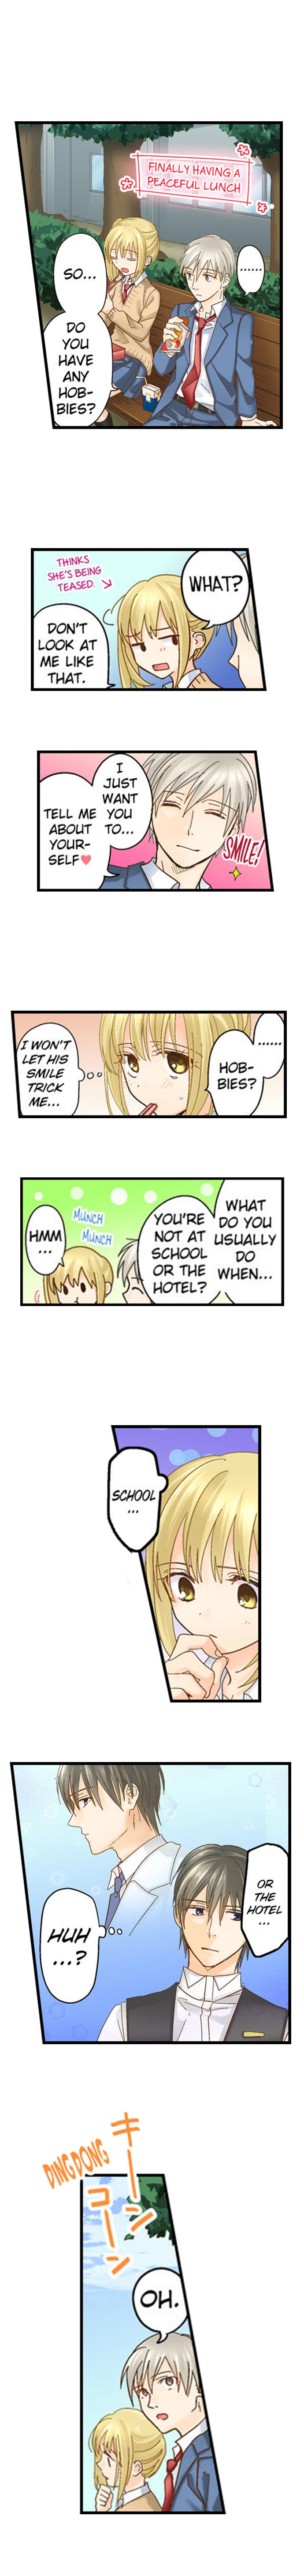 Running a Love Hotel with My Math Teacher - Chapter 29 Page 3